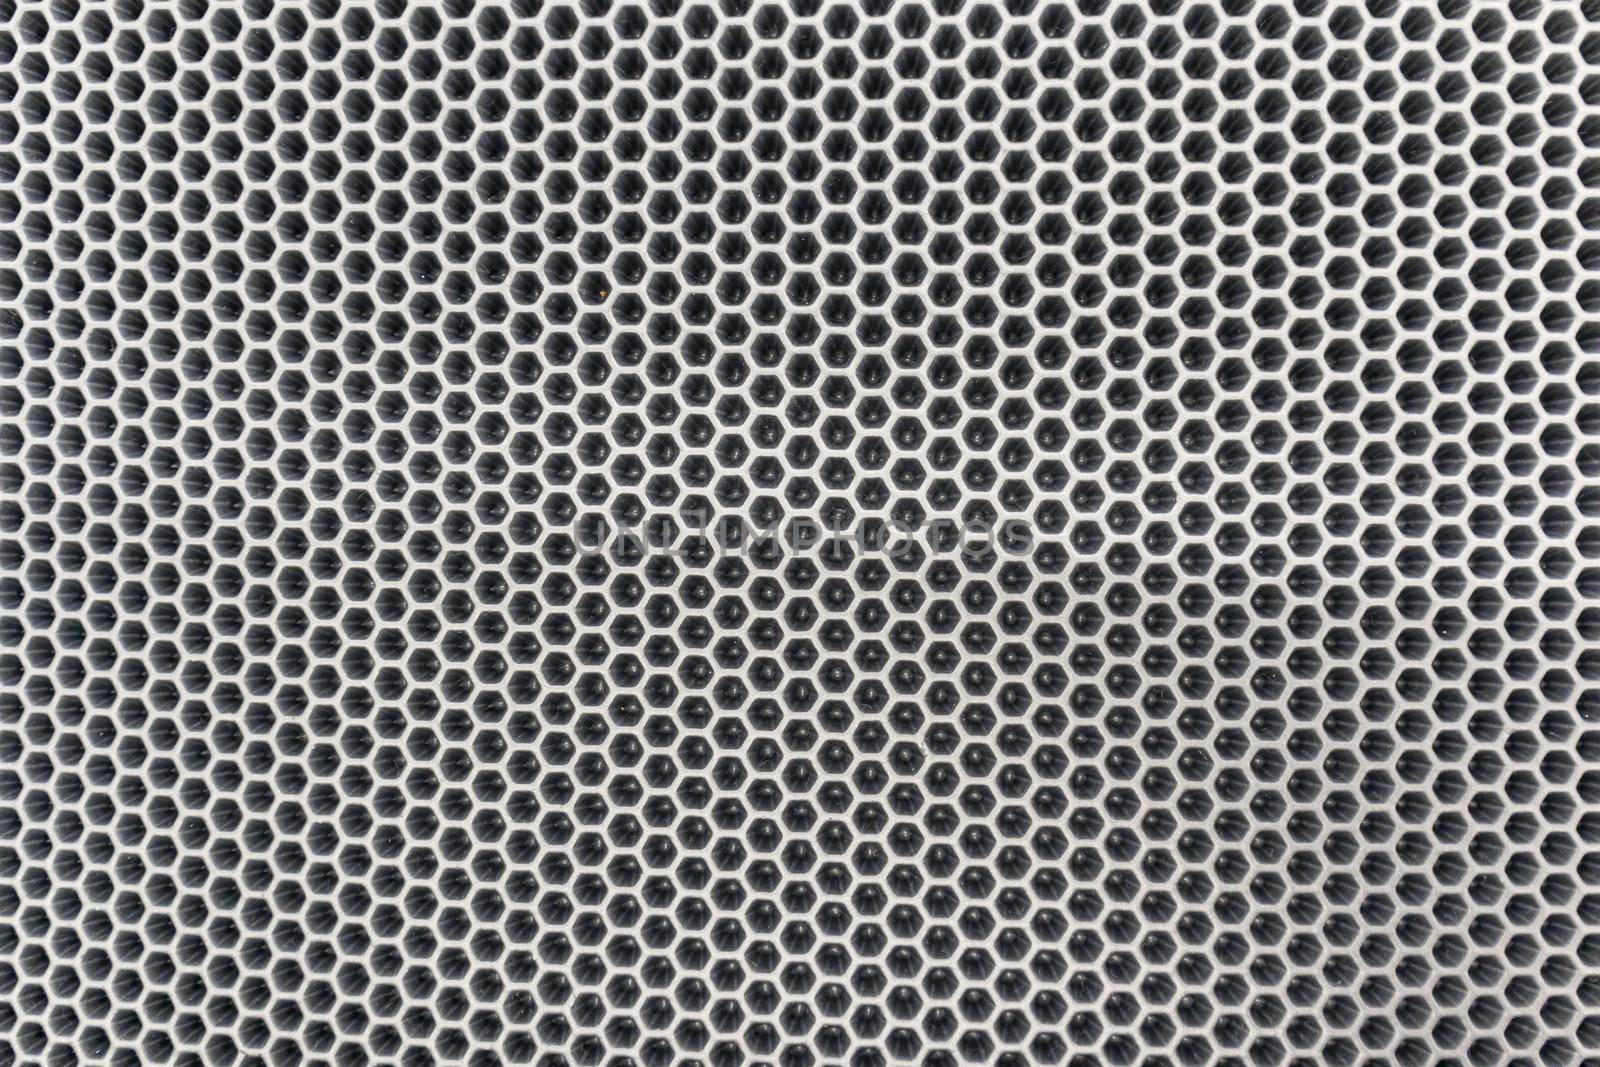 honeycombs . honeycomb pattern in black and white. High quality photo